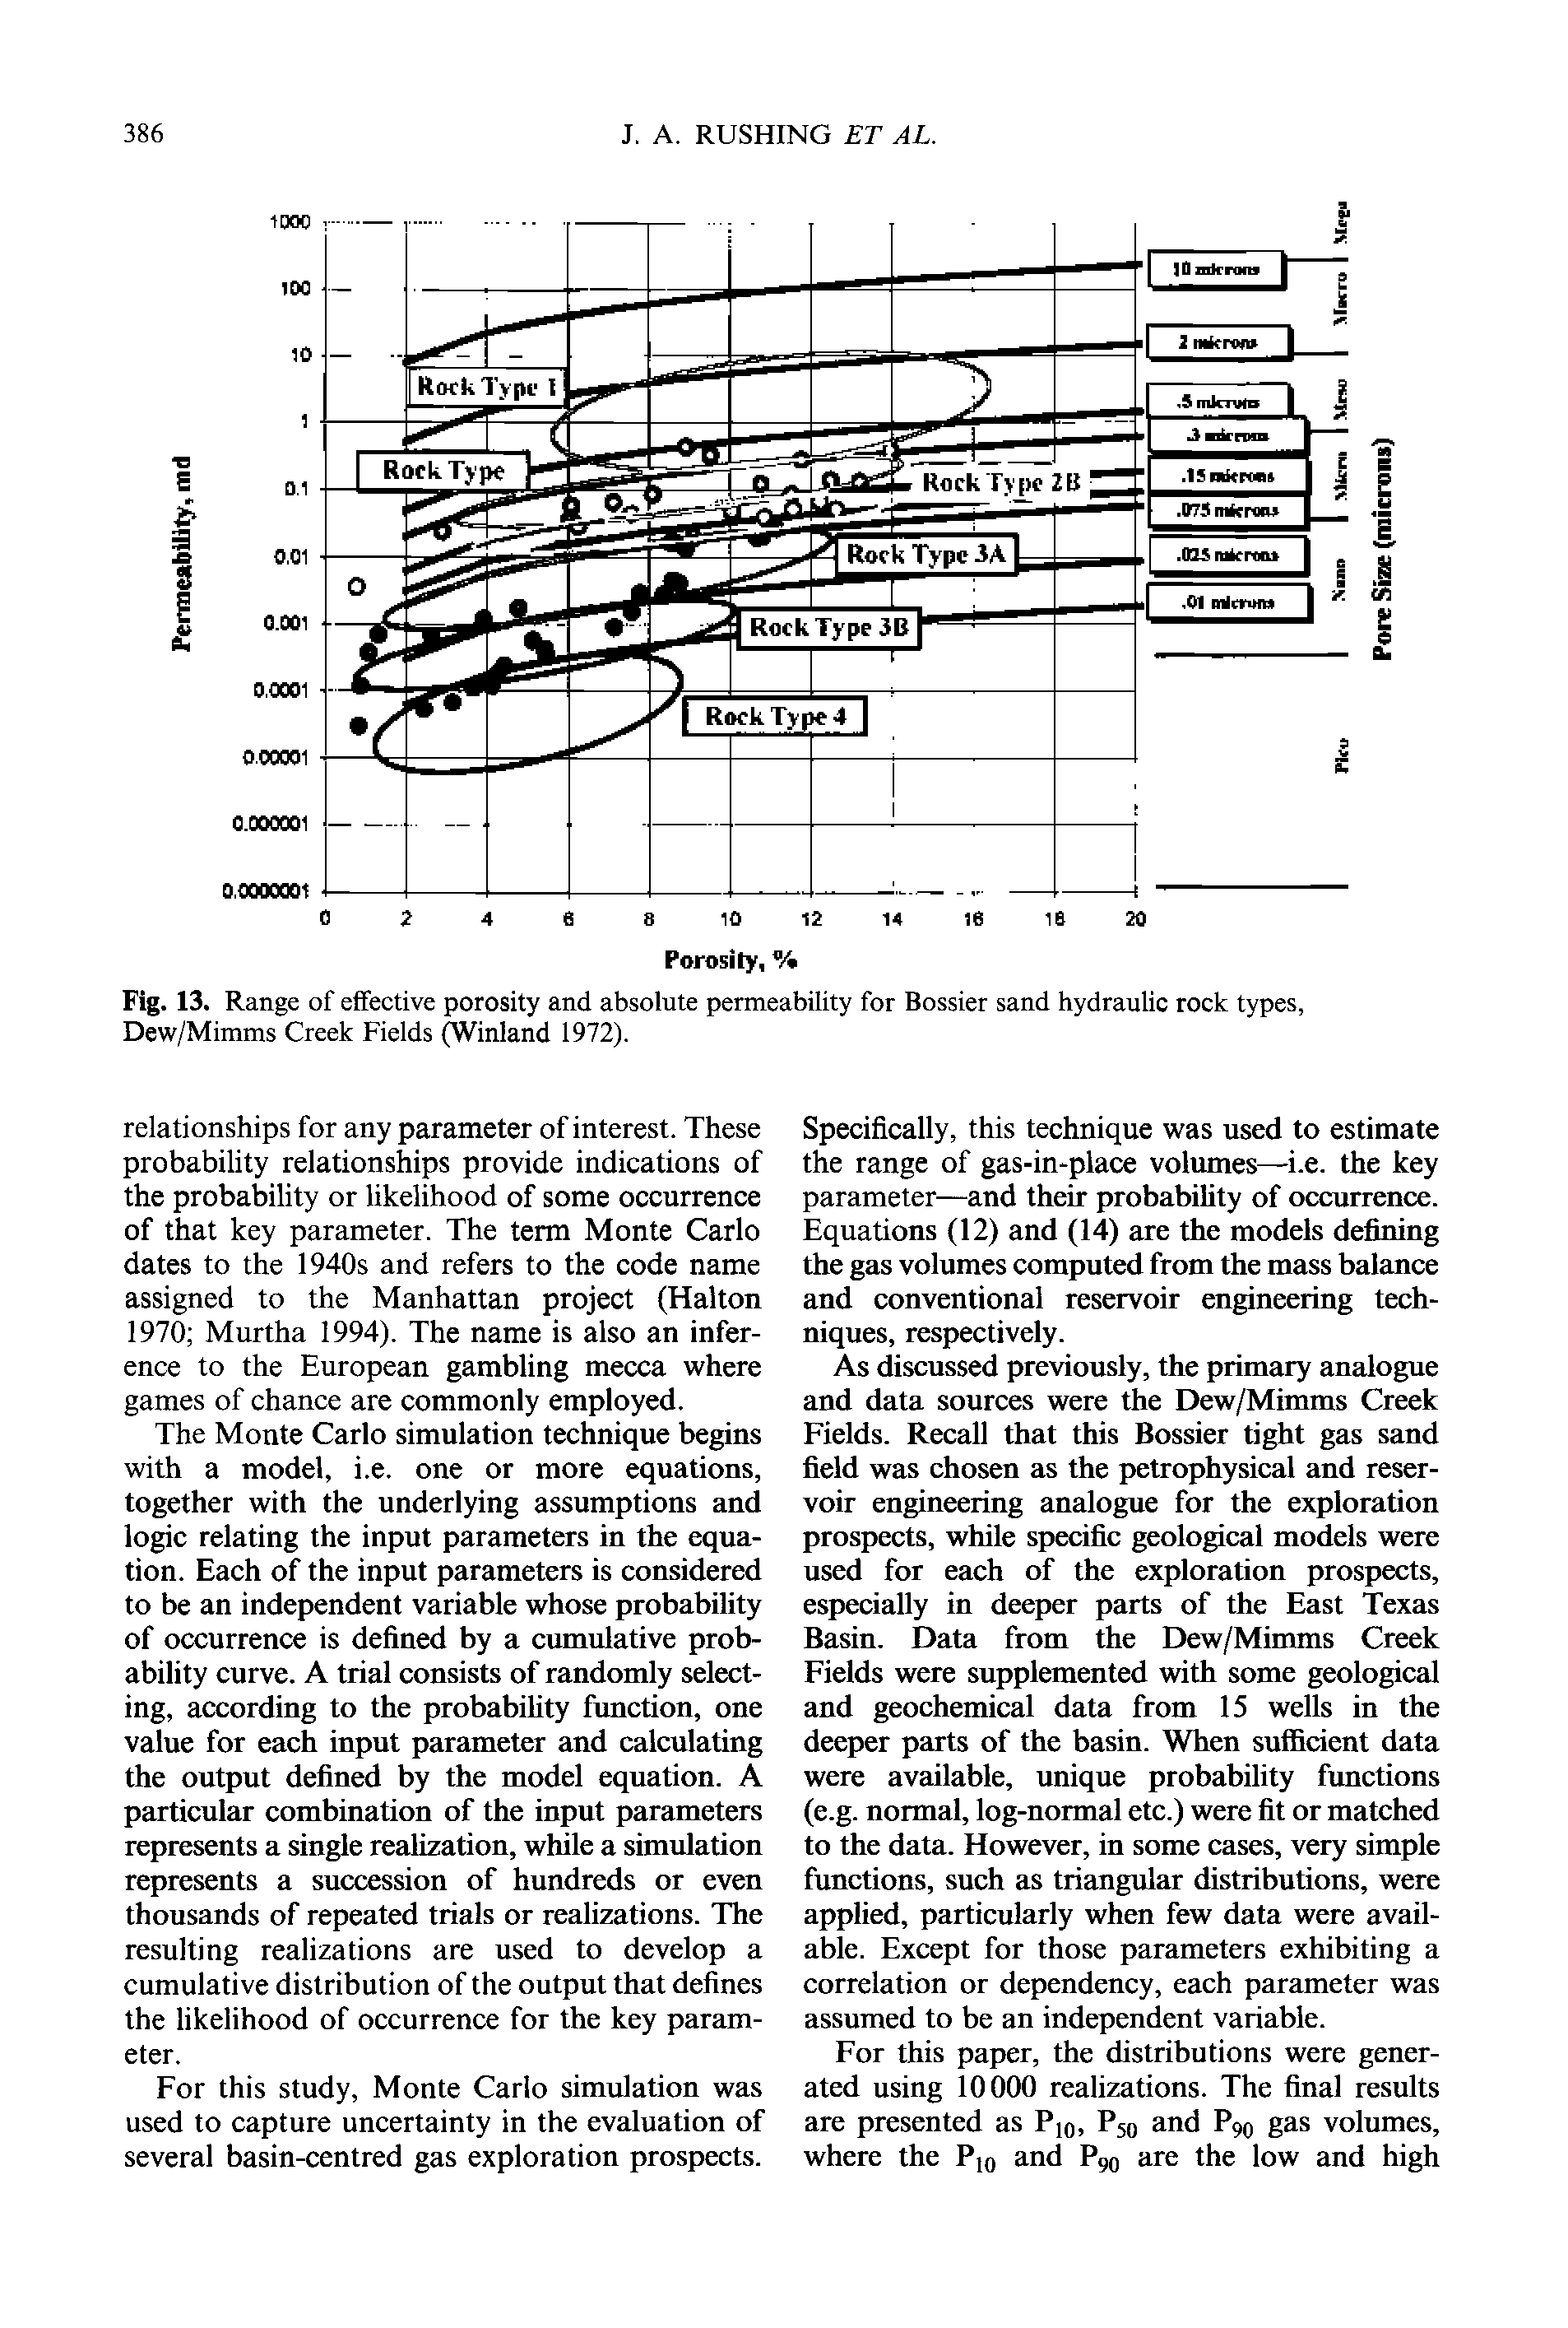 Fig. 13. Range of effective porosity and absolute permeability for Bossier sand hydraulic rock types, Dew/Mimms Creek Fields (Winland 1972).